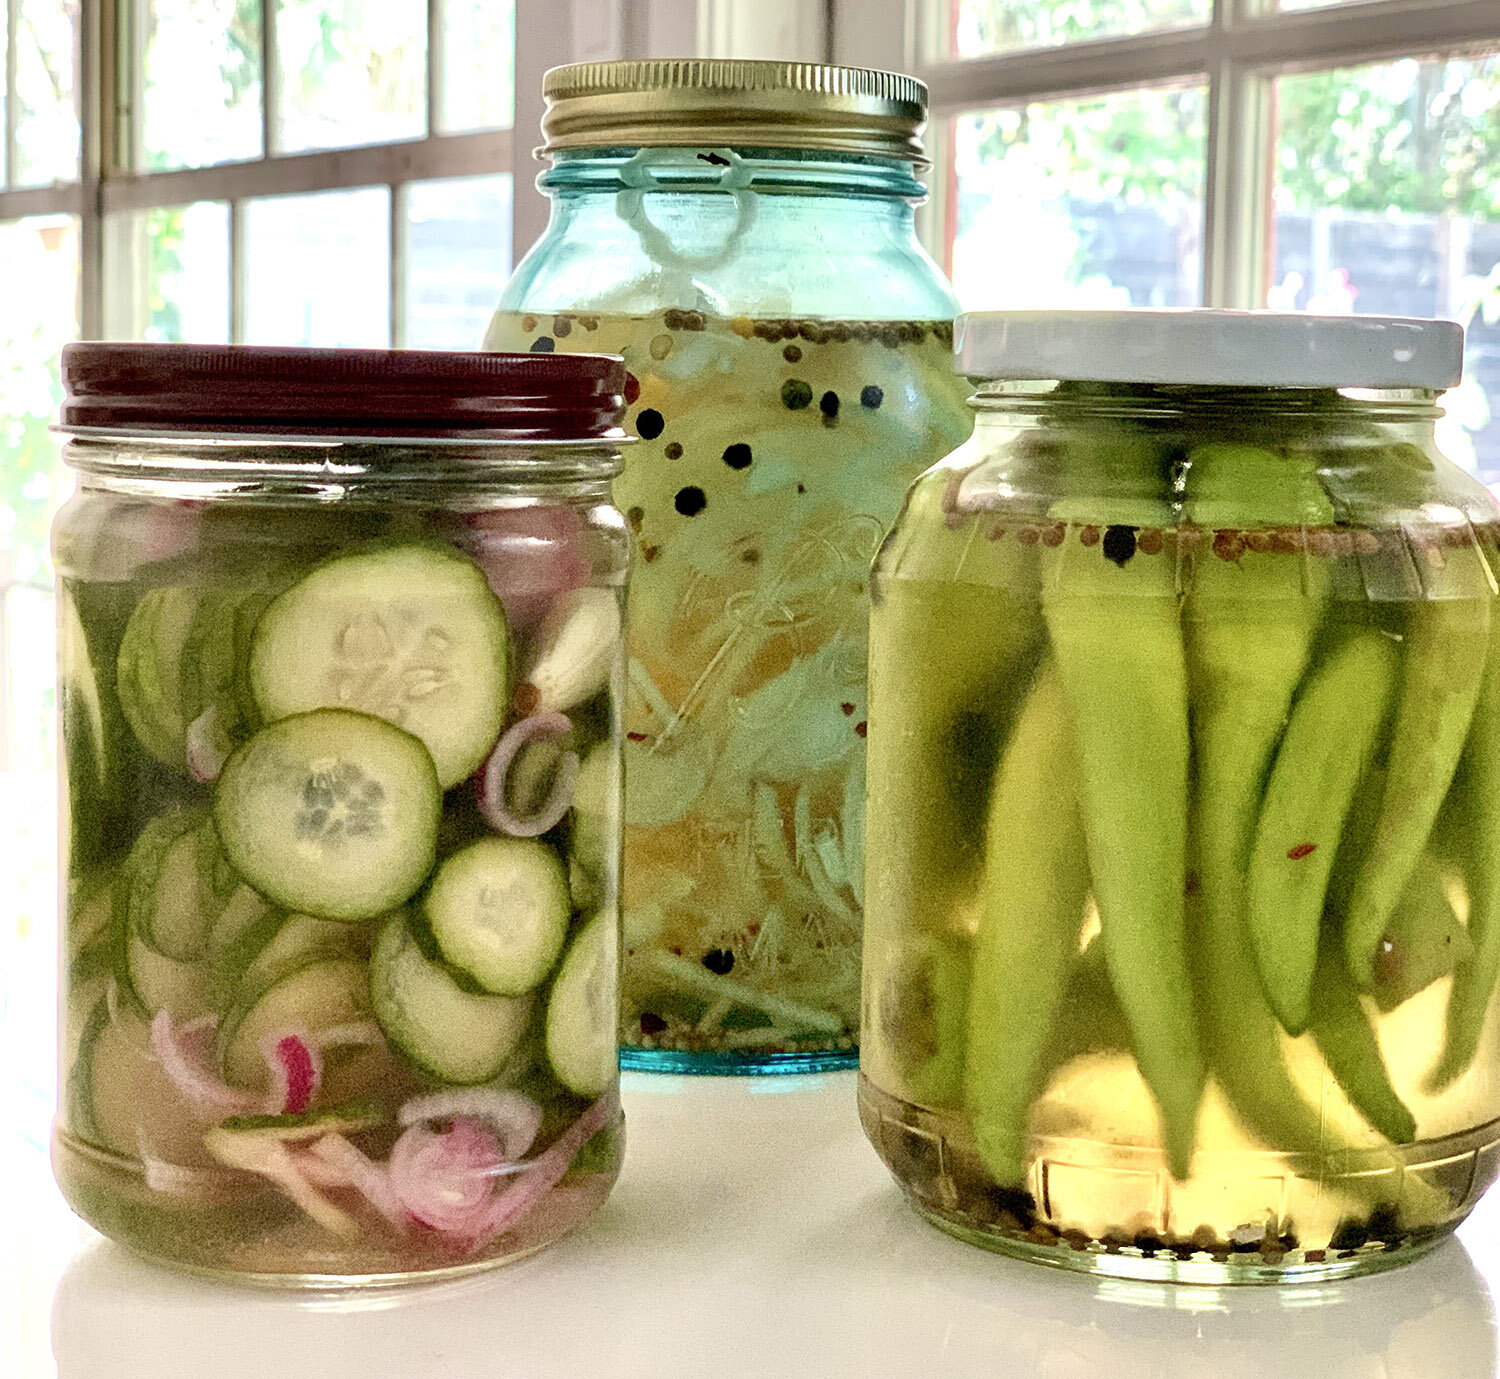 Ran out of Mason jars? Here's how to continuing pickling